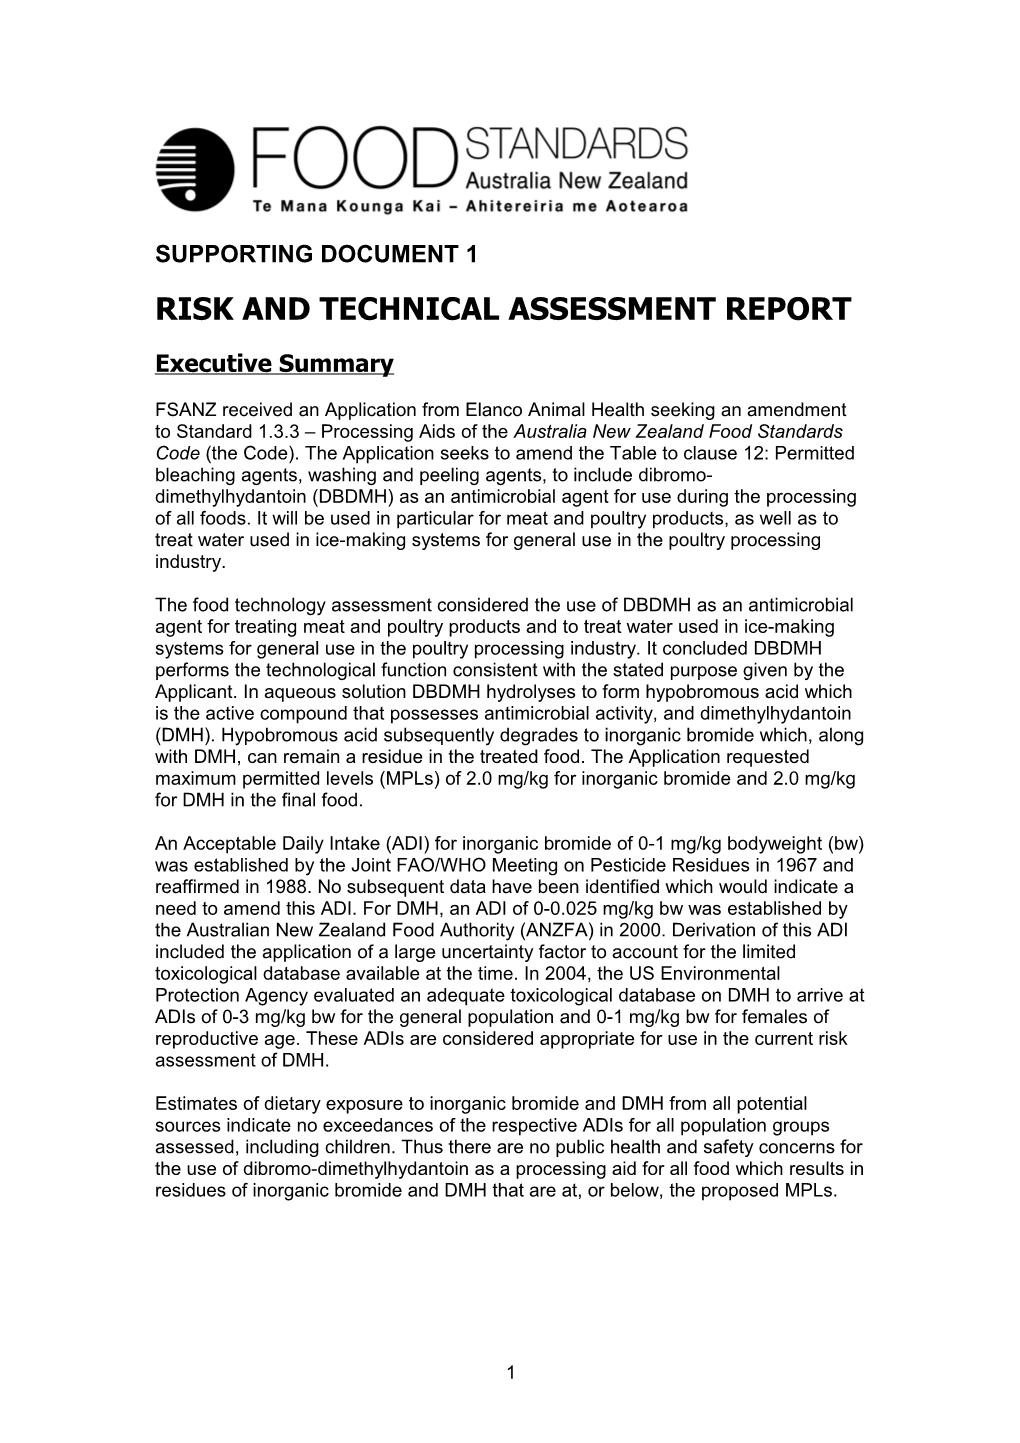 A1054 Risk and Technical Assessment